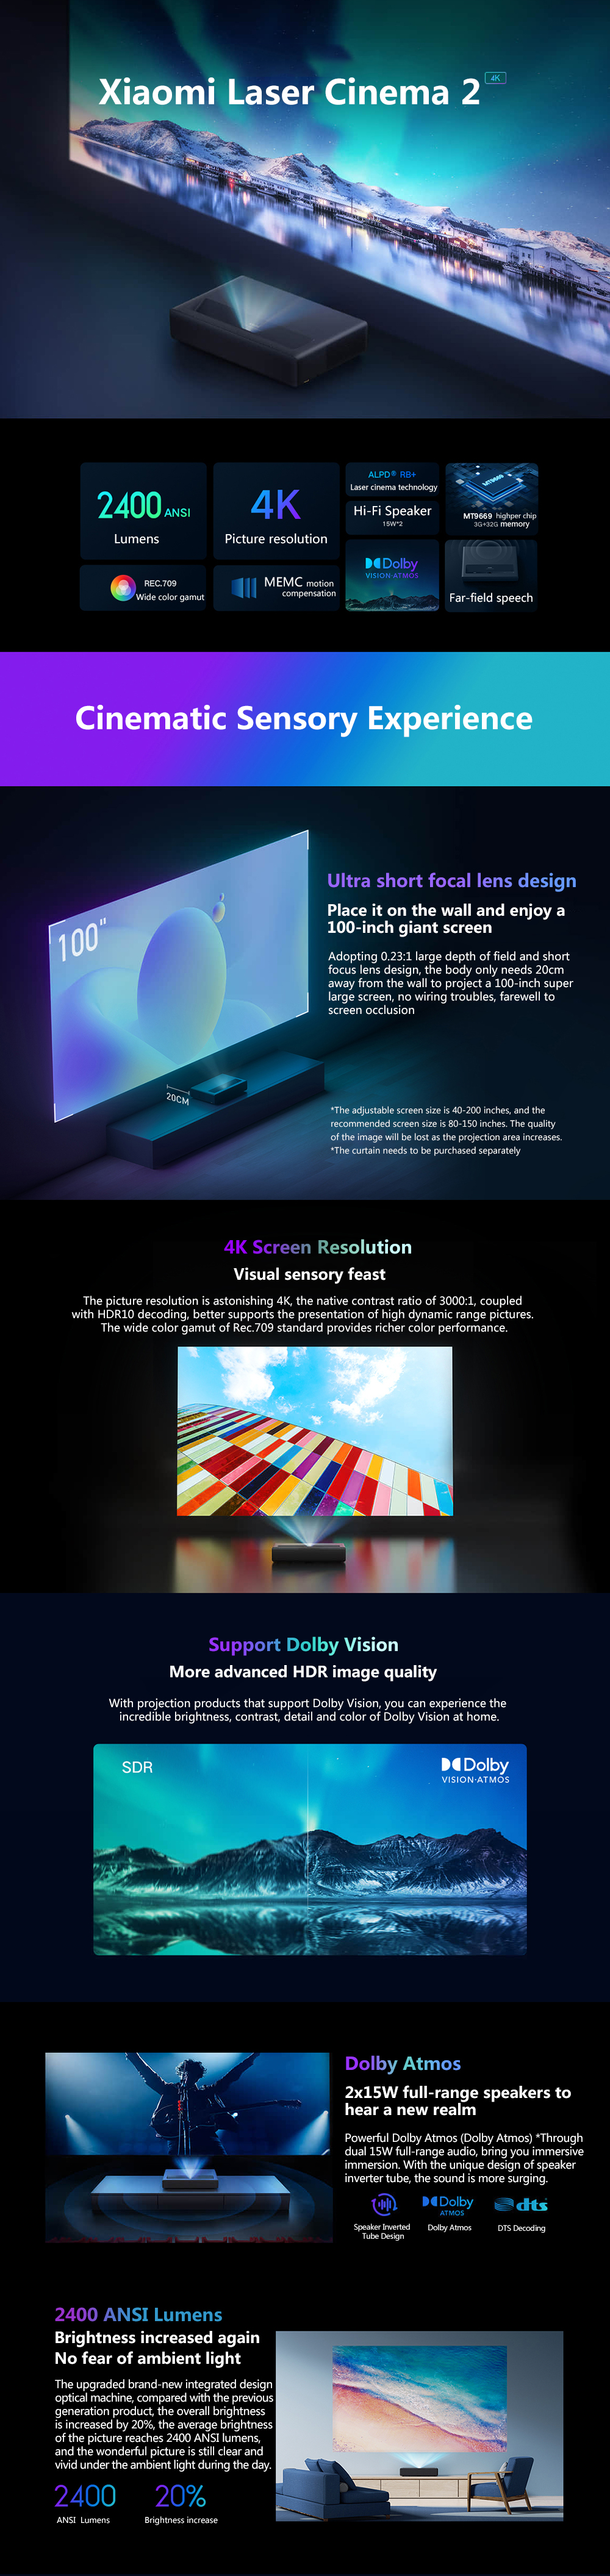 Xiaomi  Laser Cinema 2 UST 4K UHD Physical 2400 ANSI Lumens ALPD RB+ Dolby DDR4 3+32GB eMMC ROM  Electric Focus Android 9.0 150 inch Laser Smart TV MEMC 5G Wifi Bluetooth 5.0 Projector Home Theater Movie